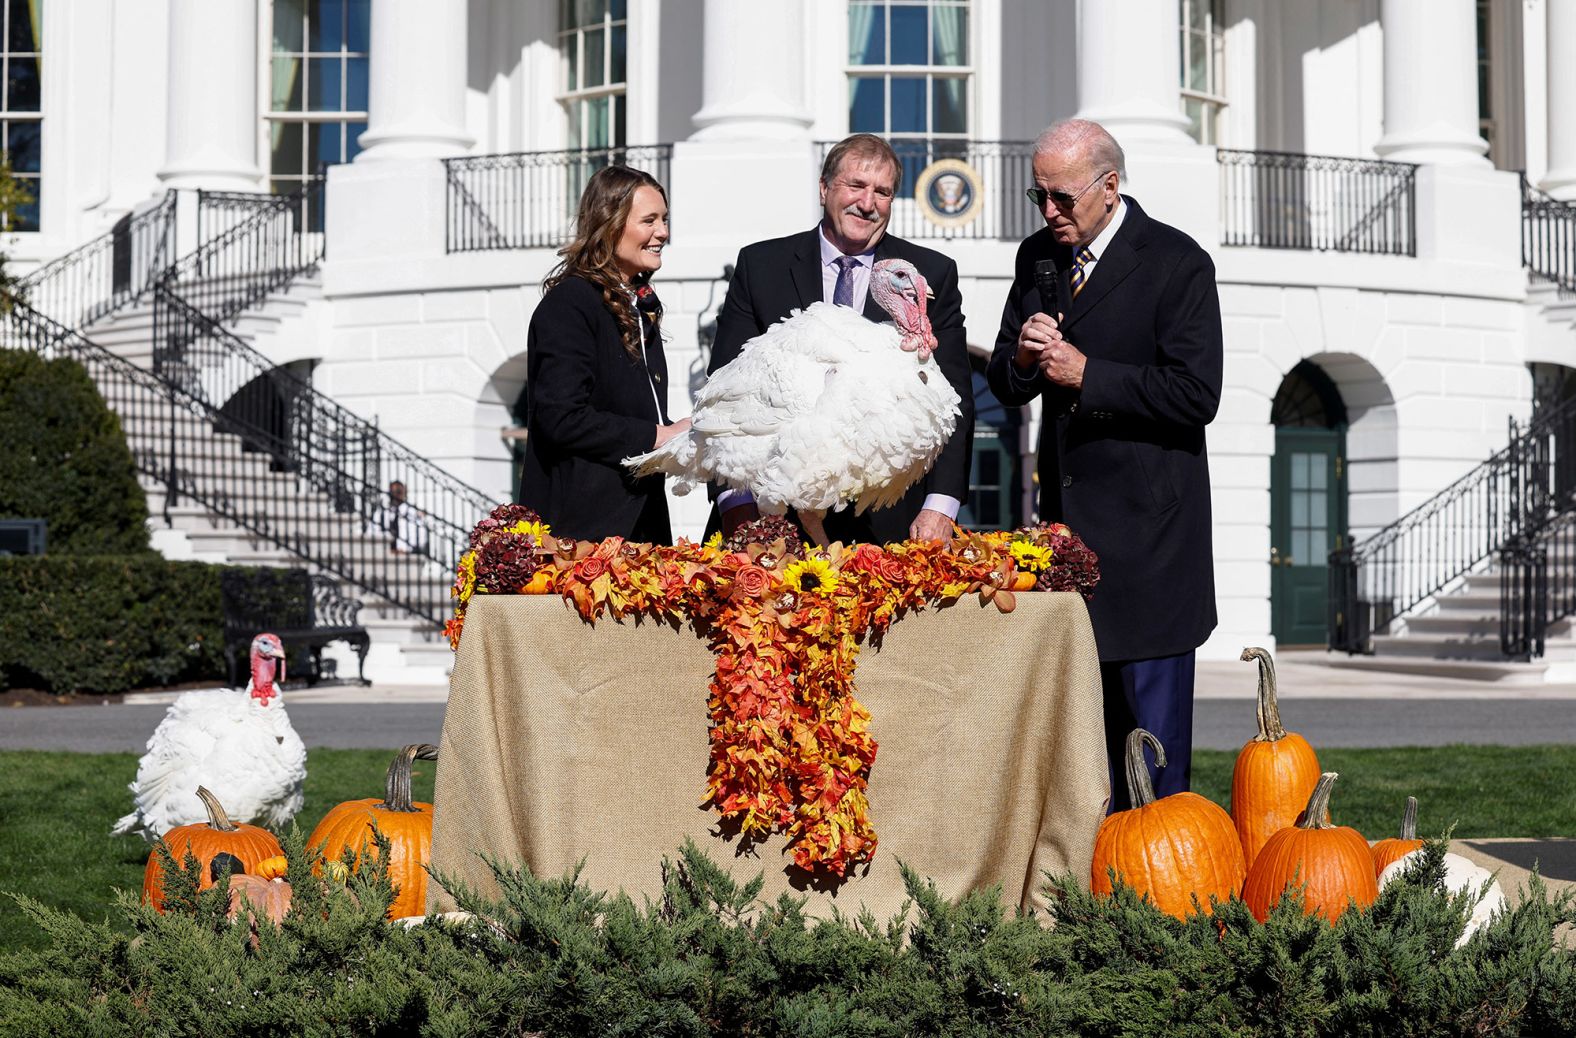 Biden attends the traditional White House ceremony to "pardon" a couple of turkeys on Monday. This year's turkeys were named Chocolate and Chip.